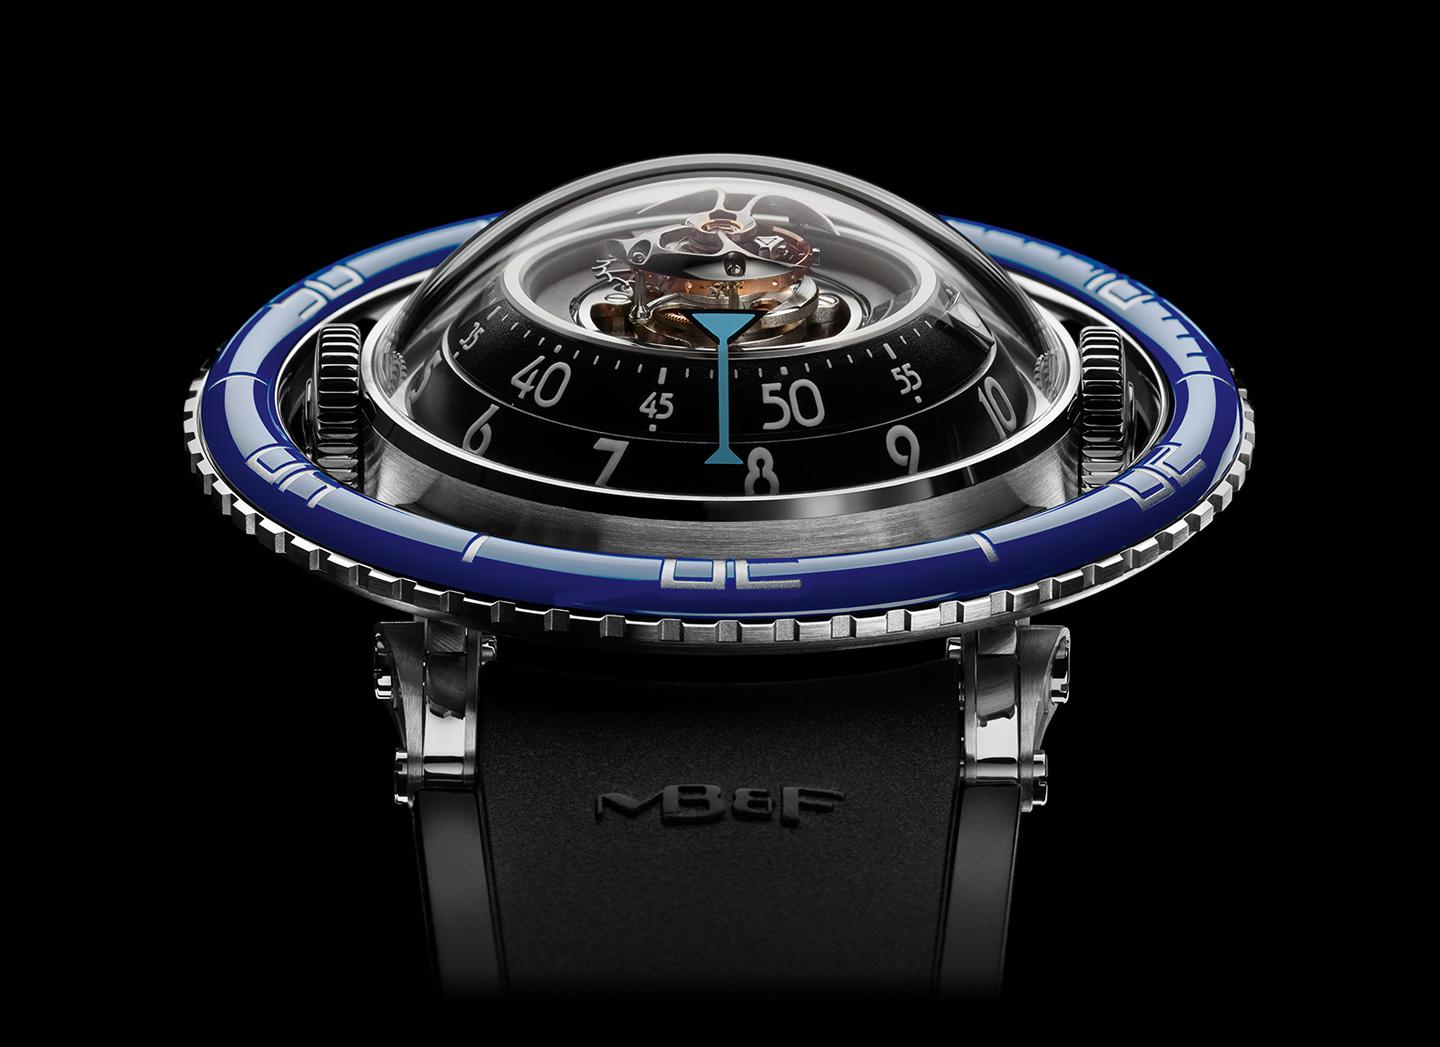 HM7 ‘Aquapod’ watch launched at MB&F M.A.D Gallery Dubai